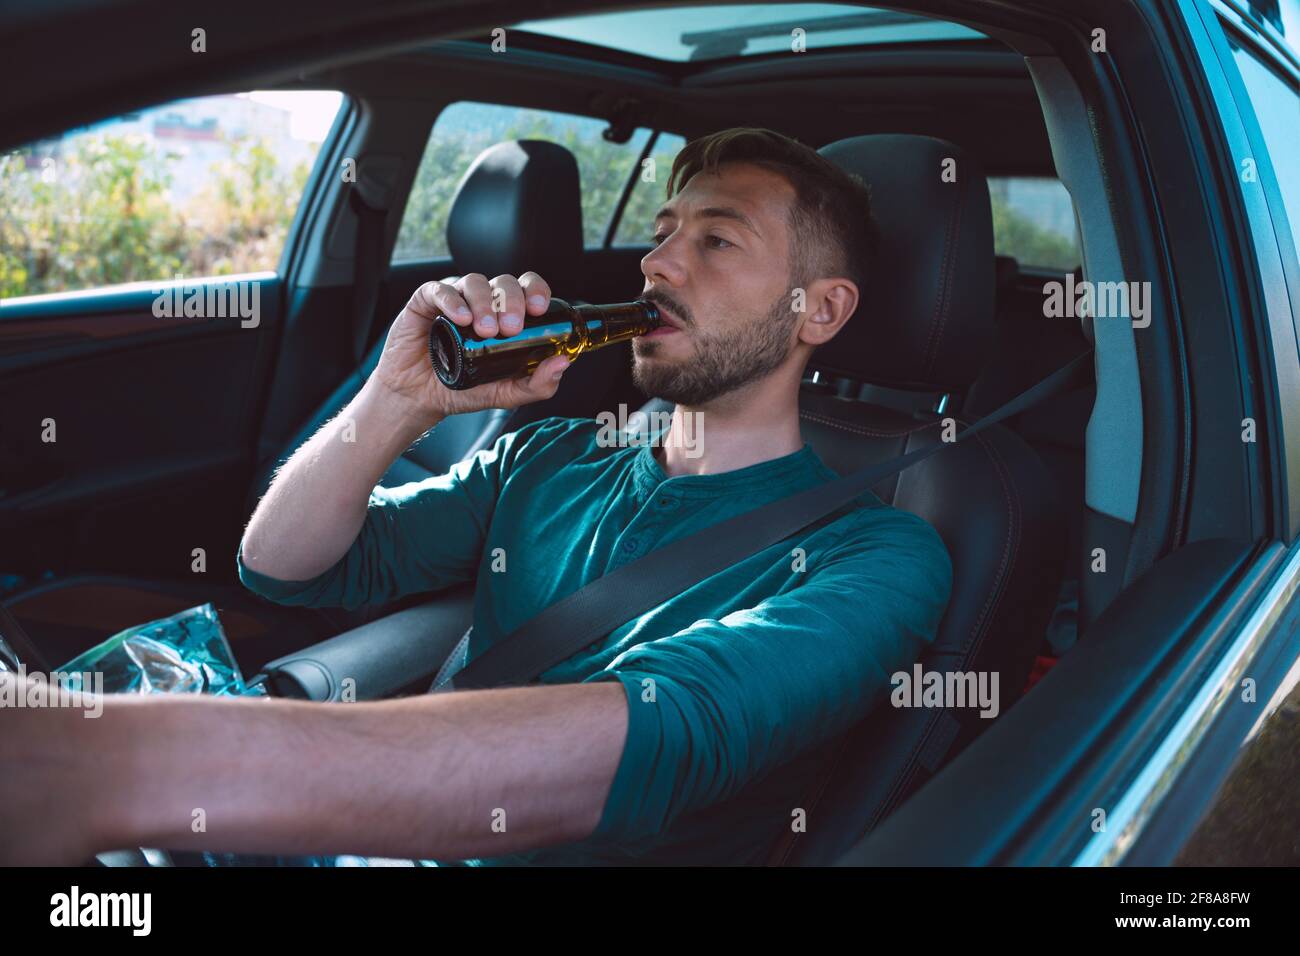 Drunk driver. Young man drinking beer while driving a car. Driver under alcohol influence. Dangerous driving concept. Stock Photo